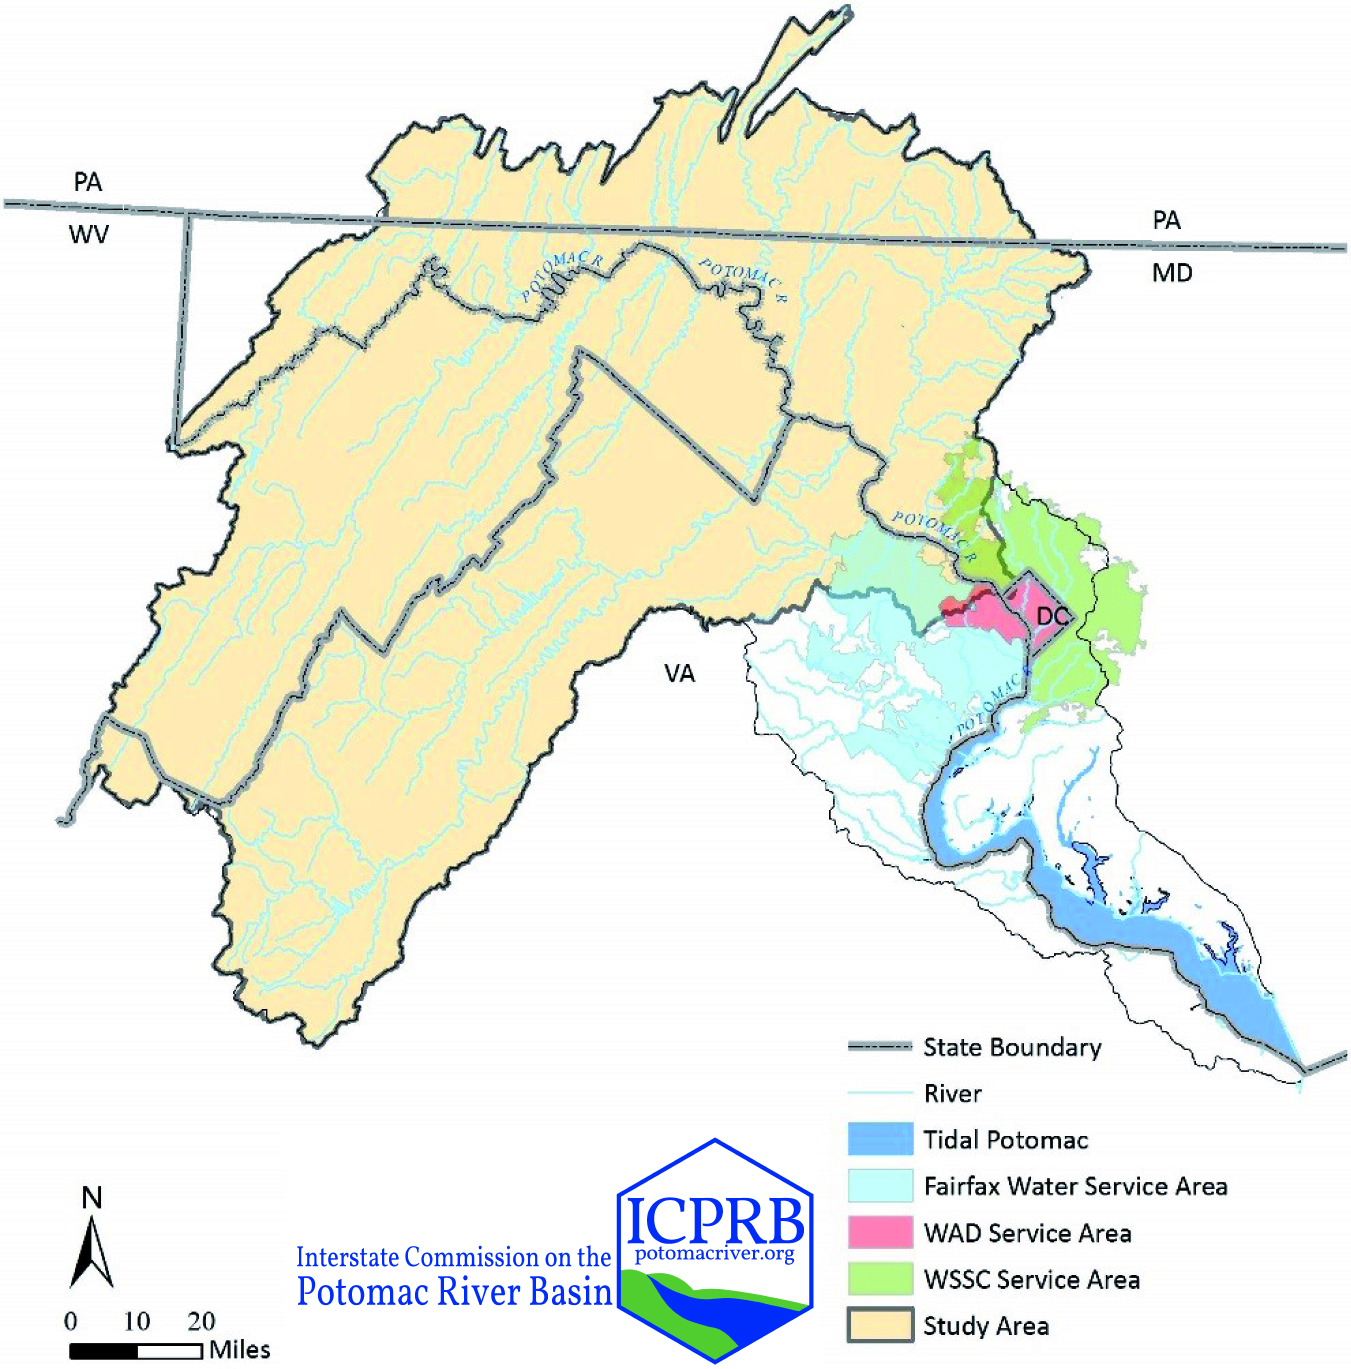 A cutout map of the Potomac River watershed showing the study area and the service areas of the water suppliers.